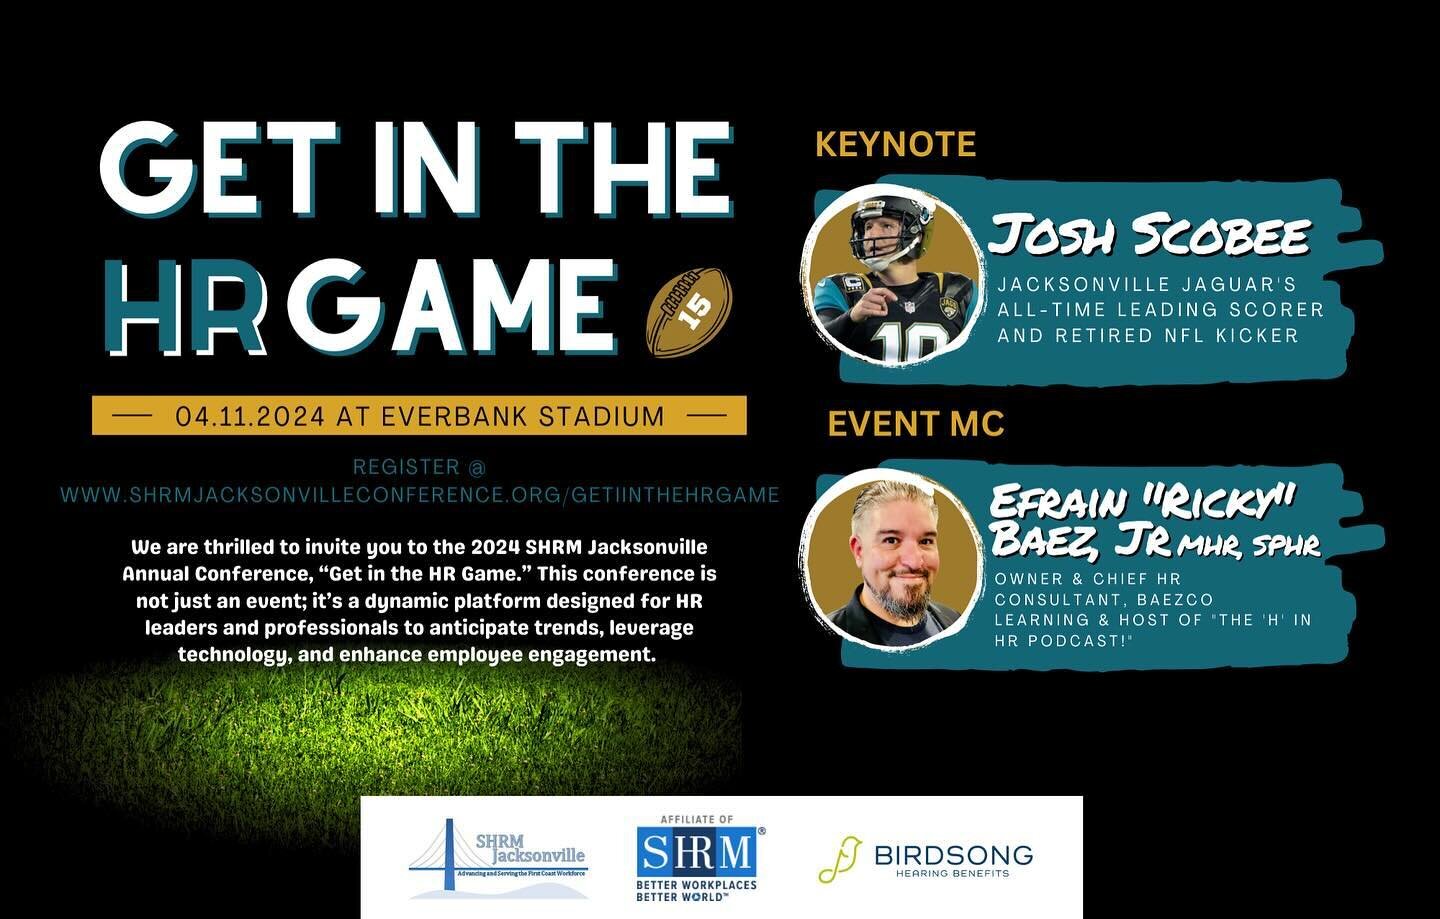 This is happening next week! @rickybhr is the emcee and will conduct a &quot;fireside chat&quot; with Jacksonville Jaguar's very own retired NFL Kicker Josh Scobee! 

Tickets are still available at: https://www.shrmjax.org/events/register.aspx?id=181